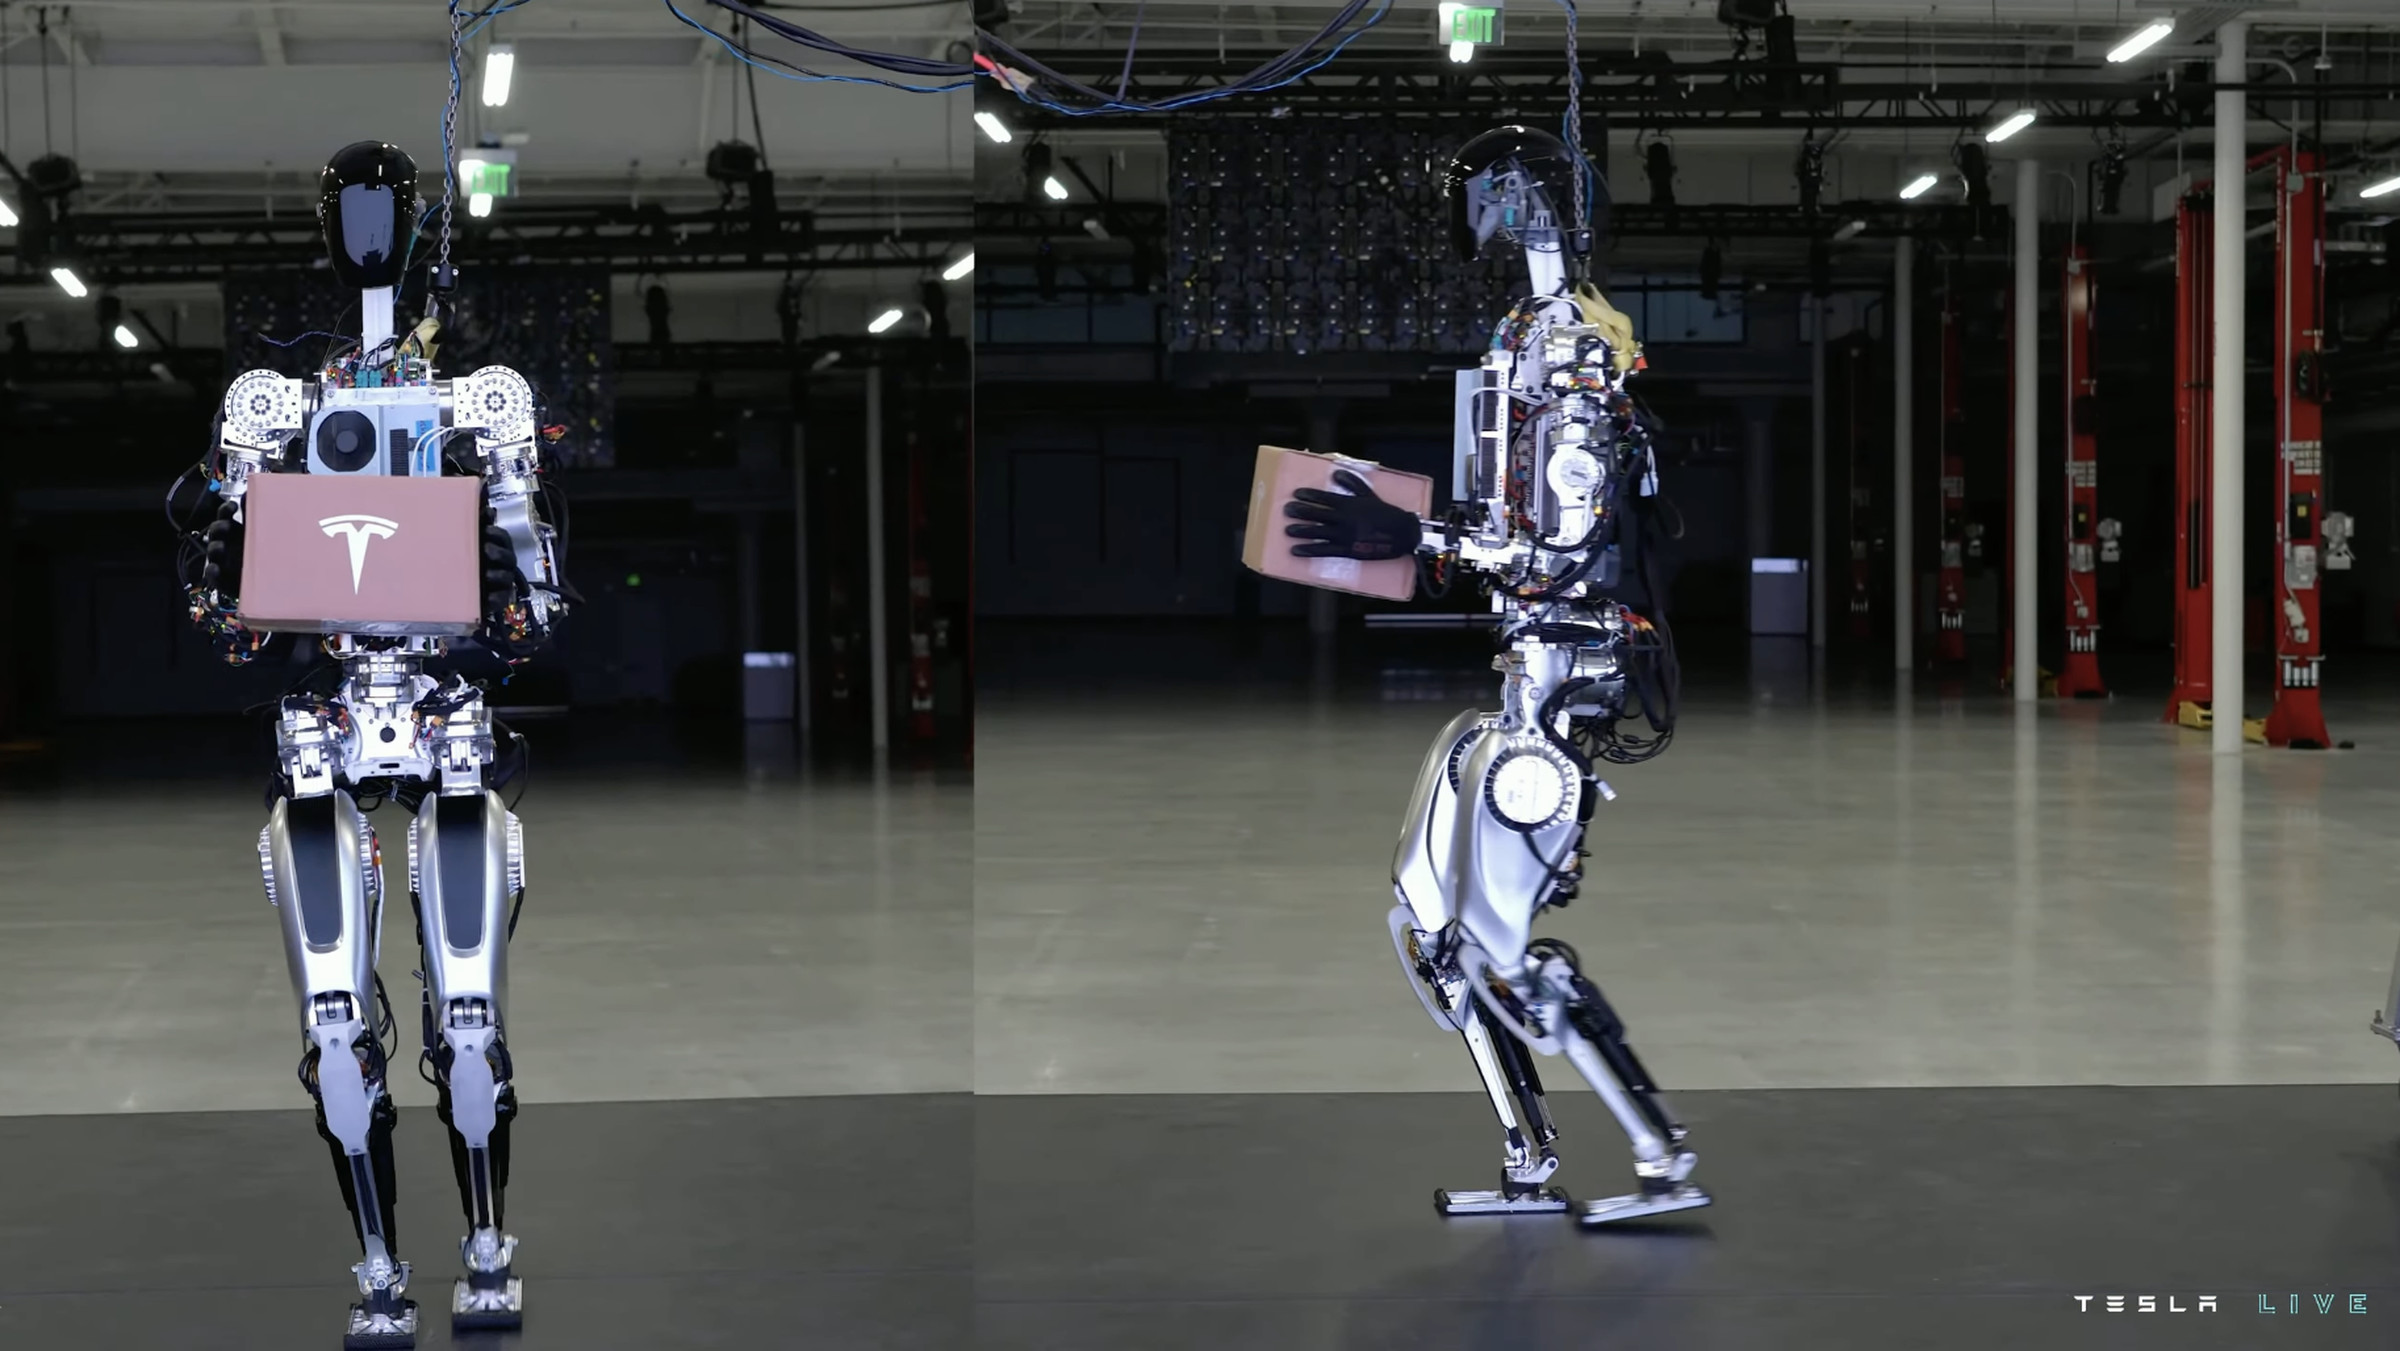 Images showing a humanoid robot walking and holding a box marked with the Tesla logo.